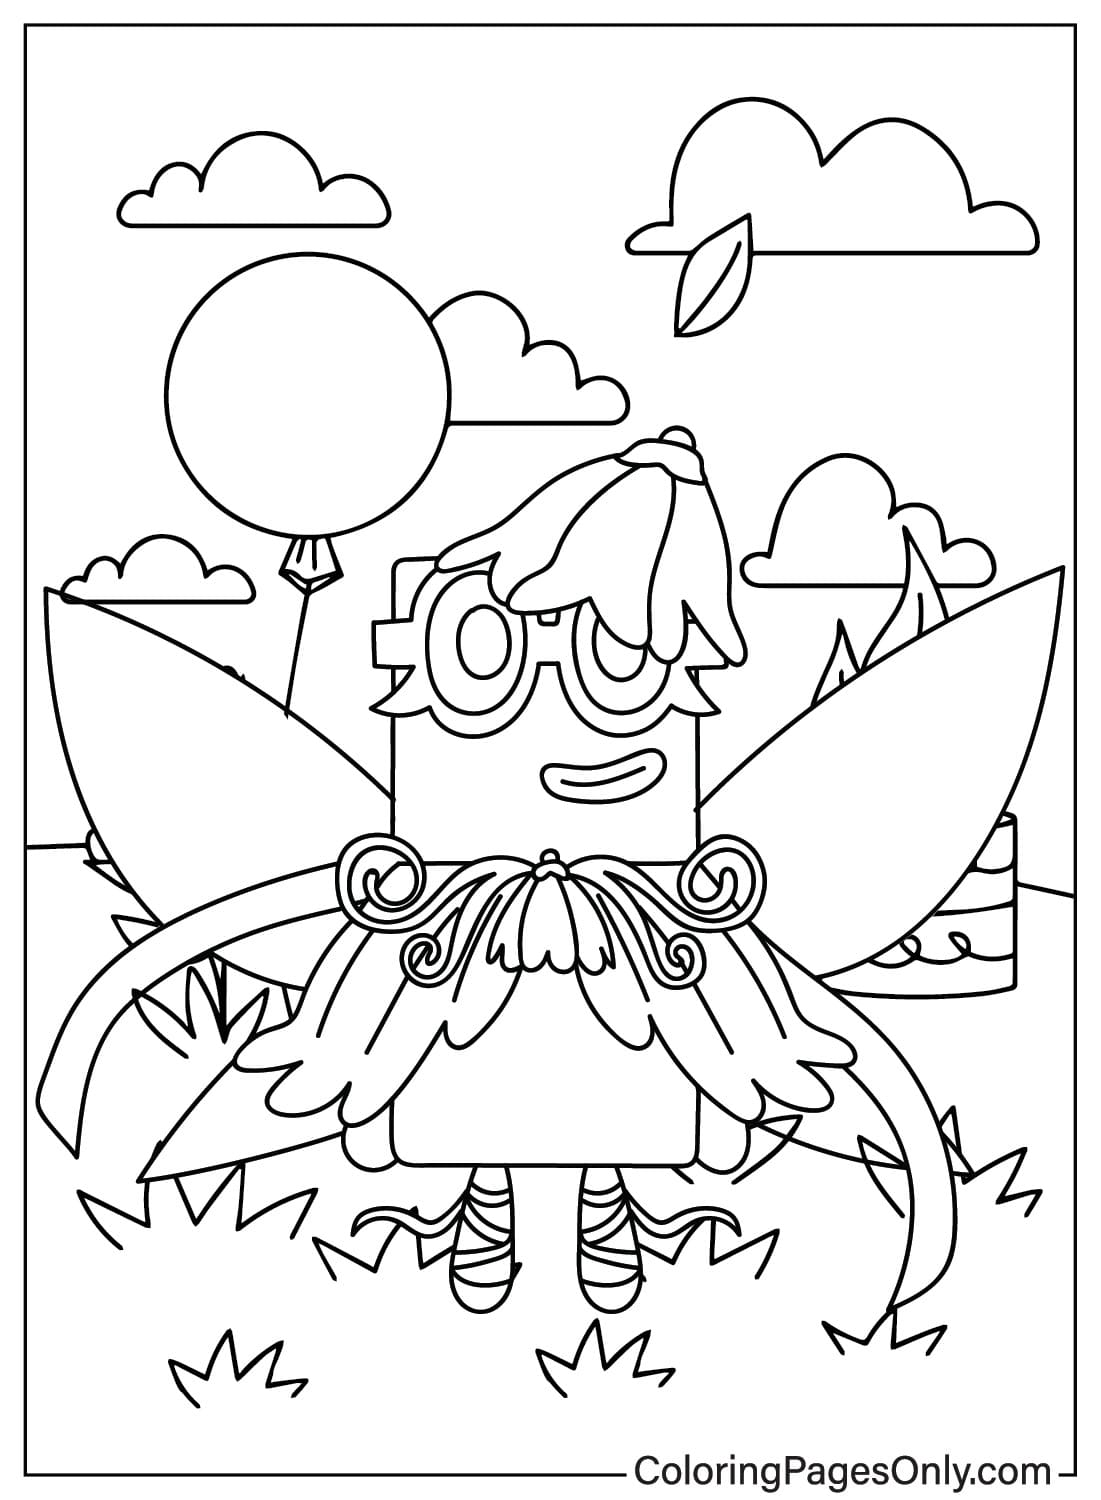 Numberblocks Coloring Page Free Coloring Page